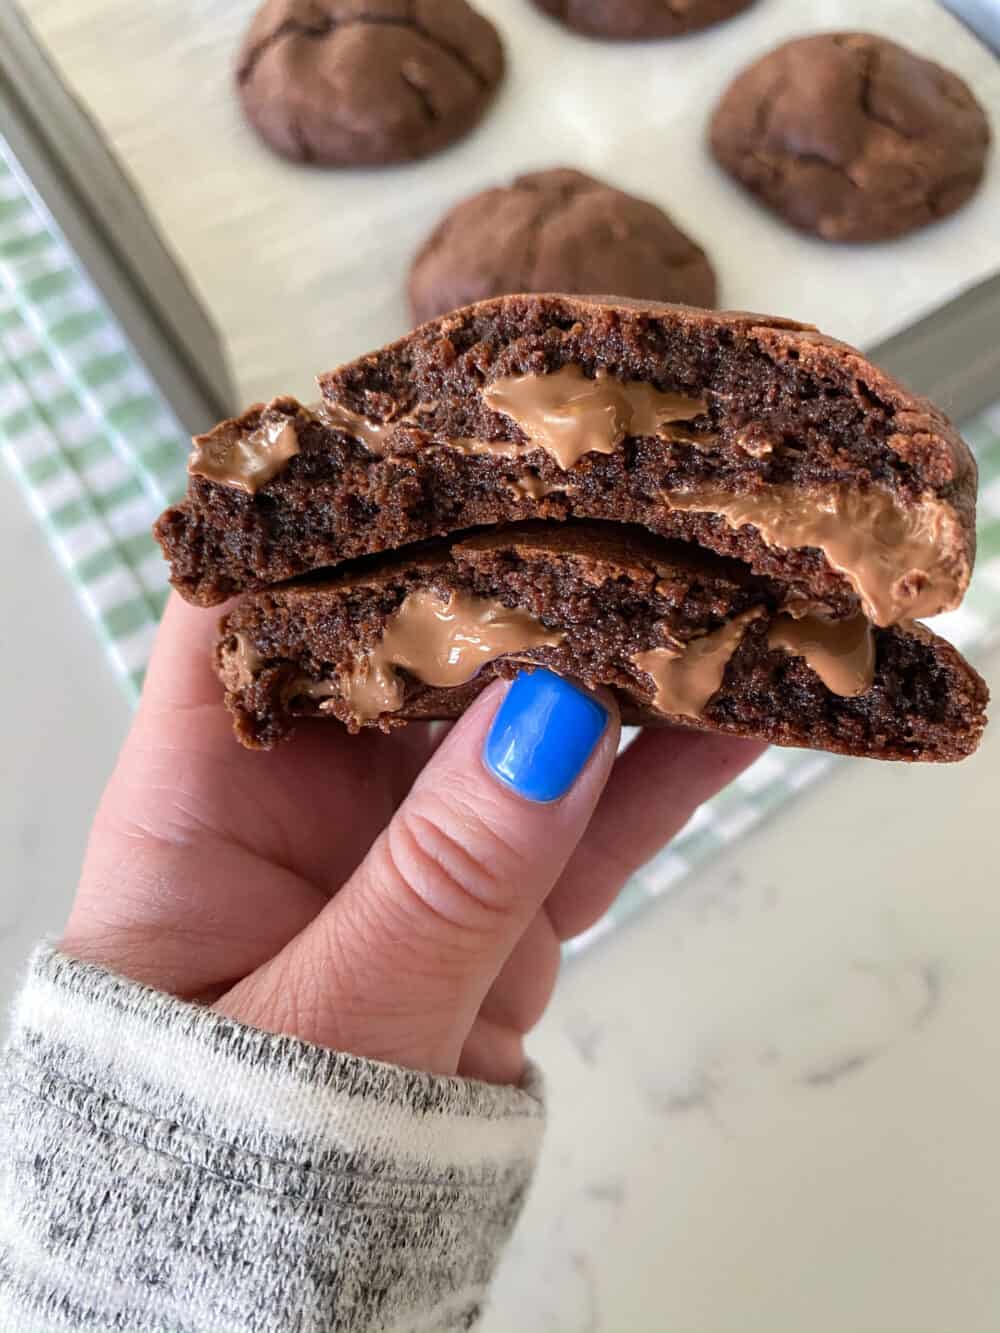 holding double chocolate chip cookies cut in half